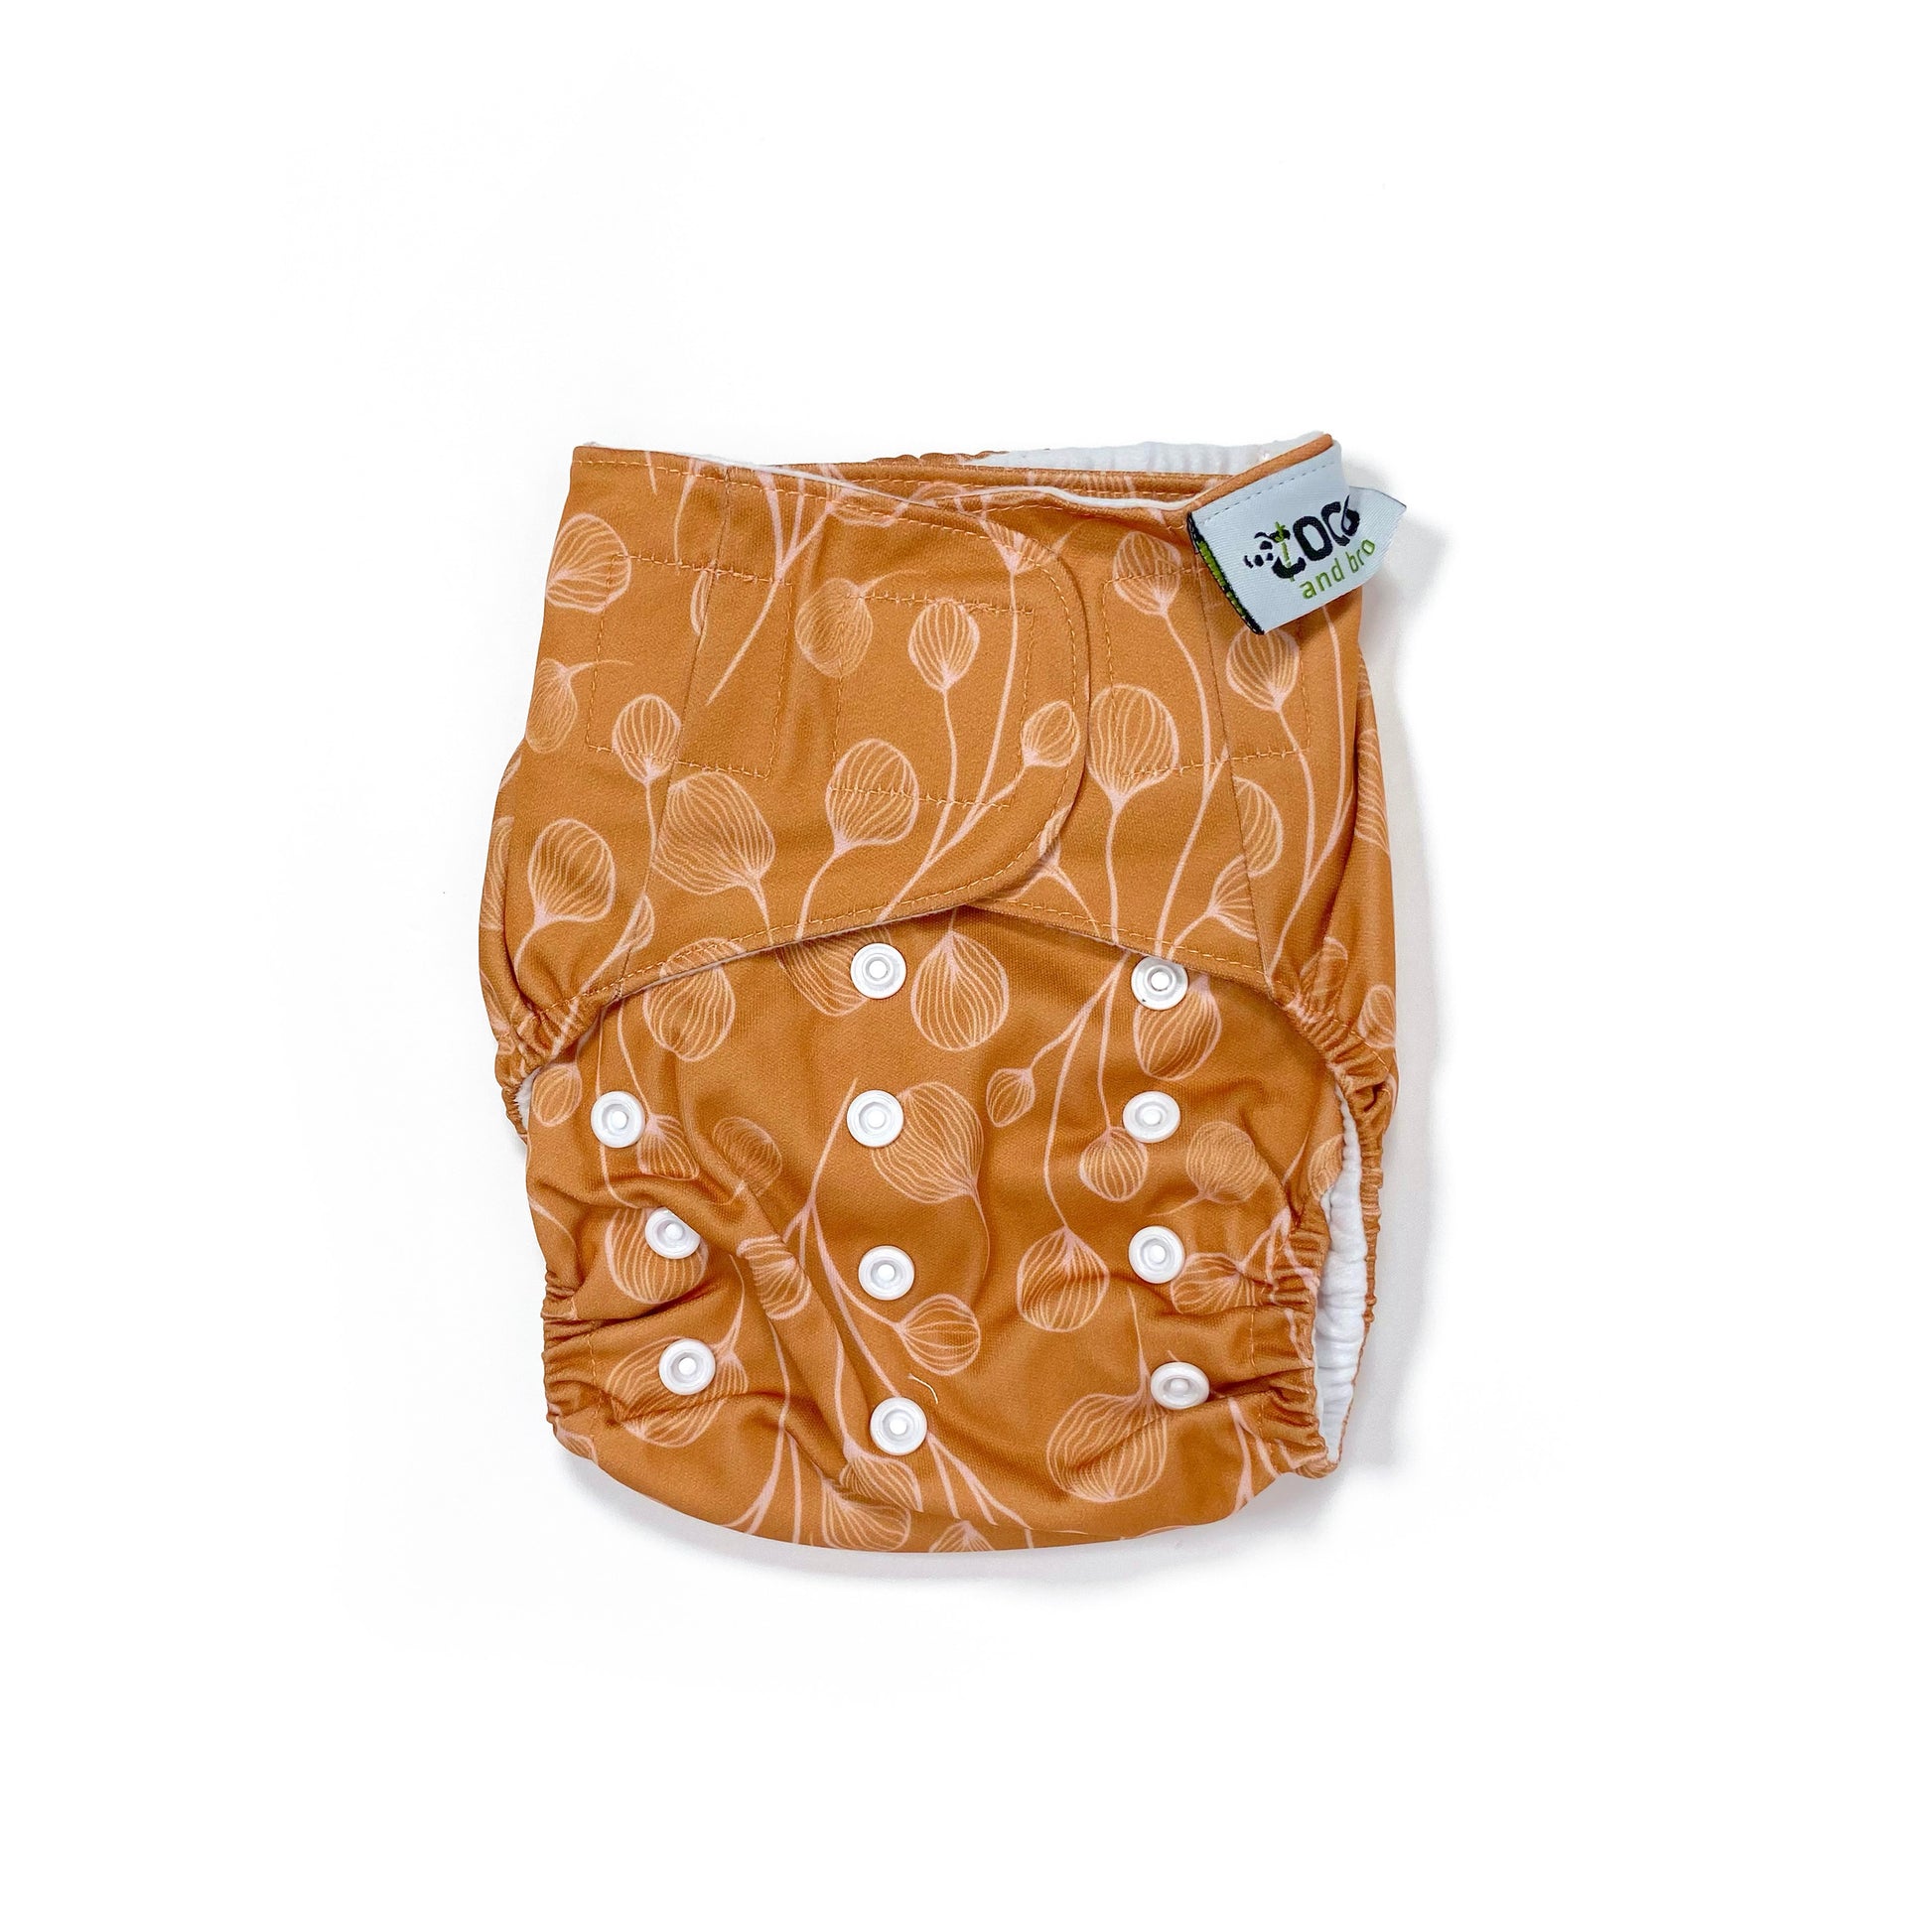 An adjustable reusable nappy for babies and toddlers, featuring a floral copper design, with floral images on a copper background. View shows the front of the nappy.